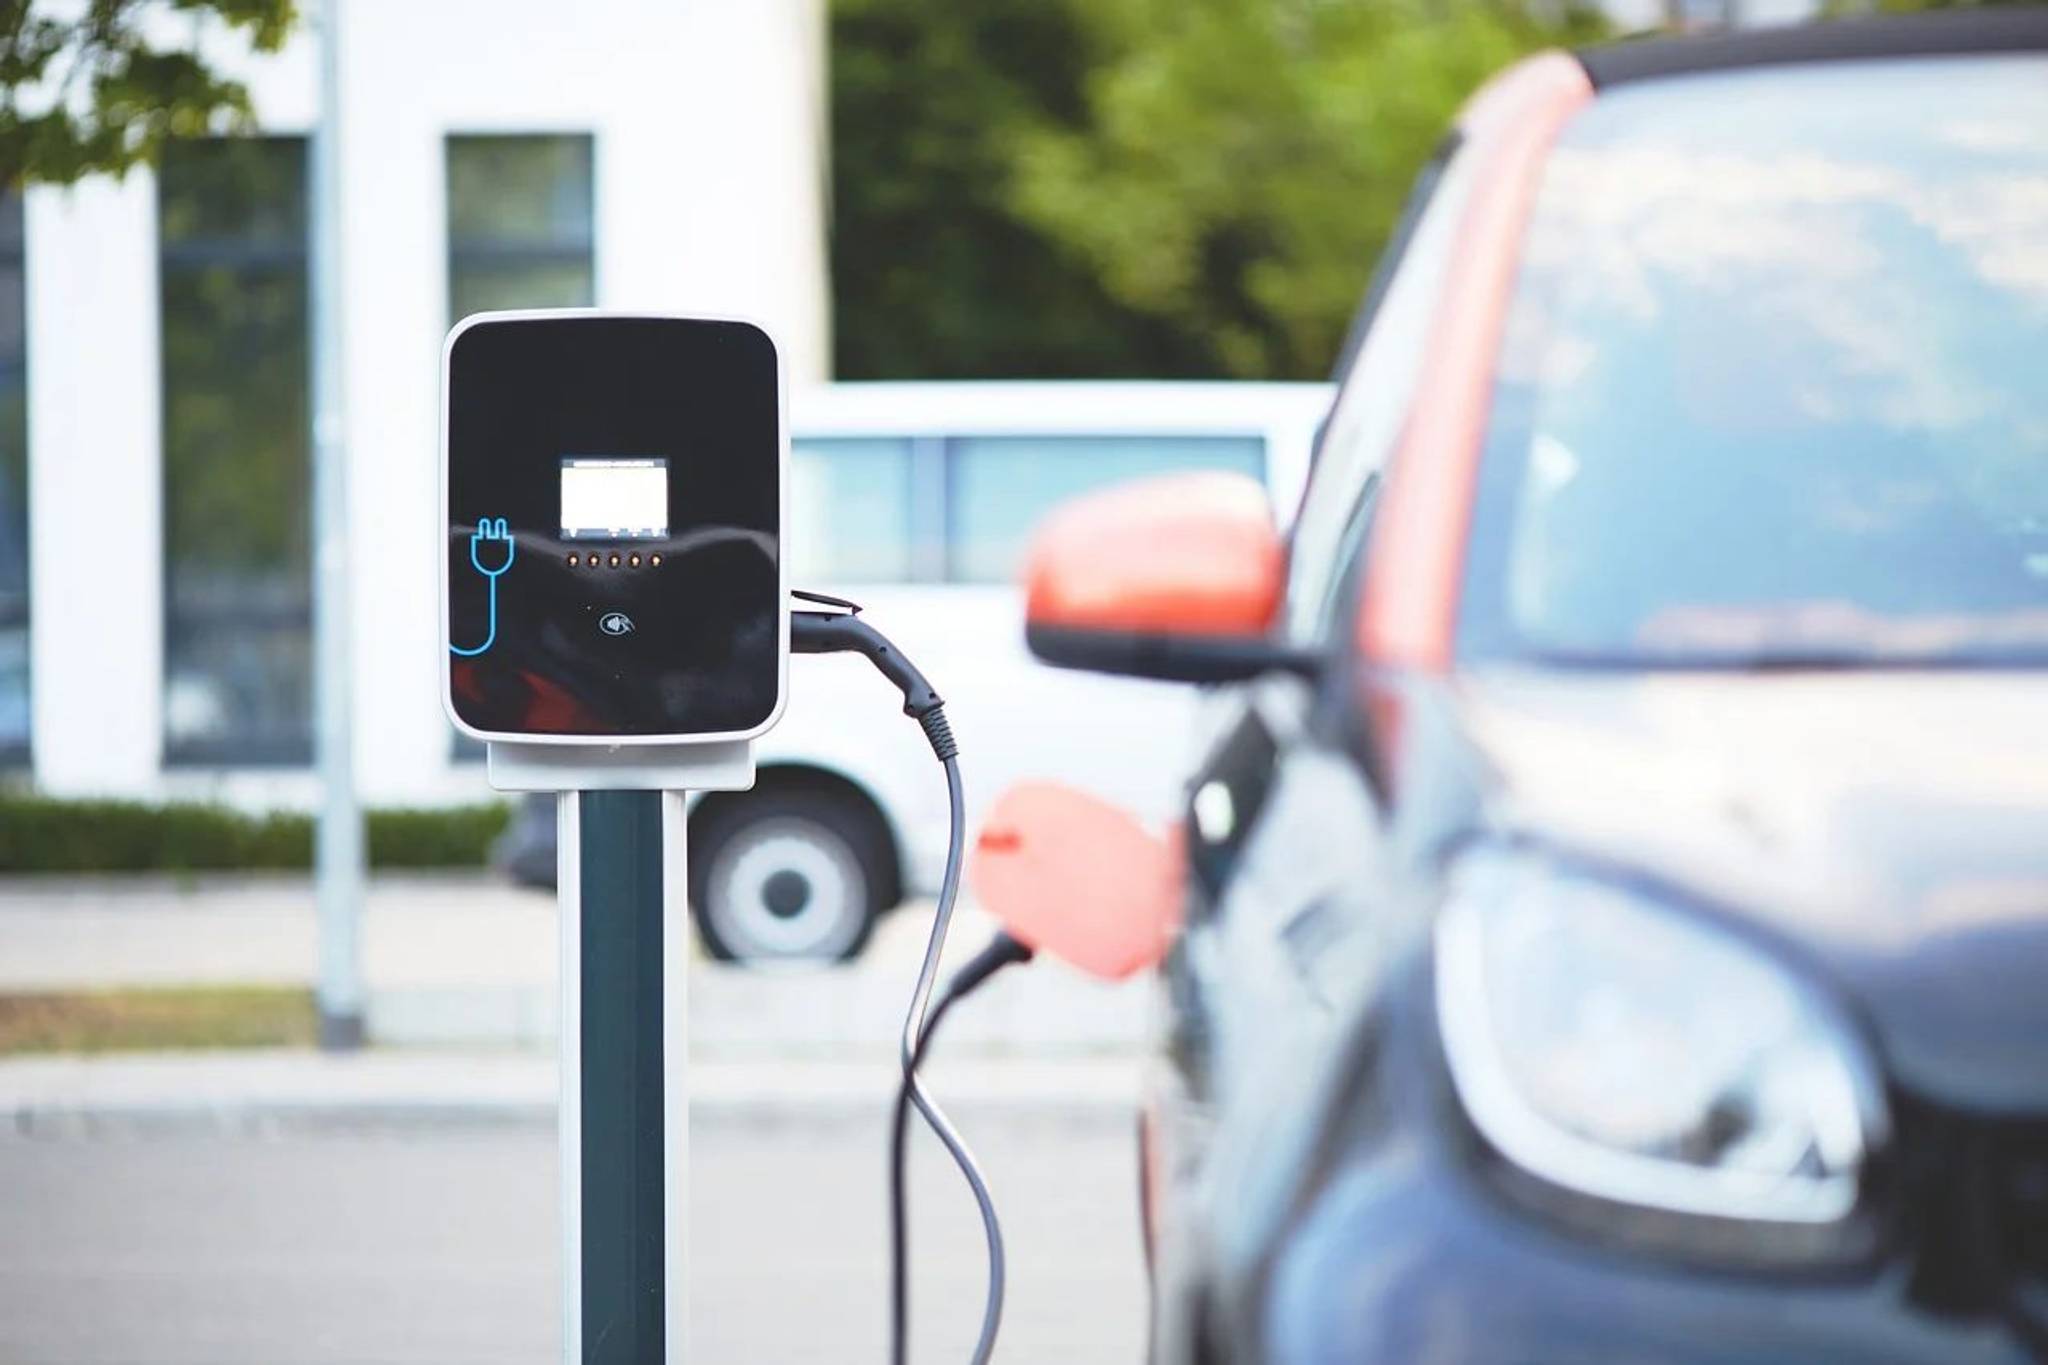 &Charge: rewarding electric mobility